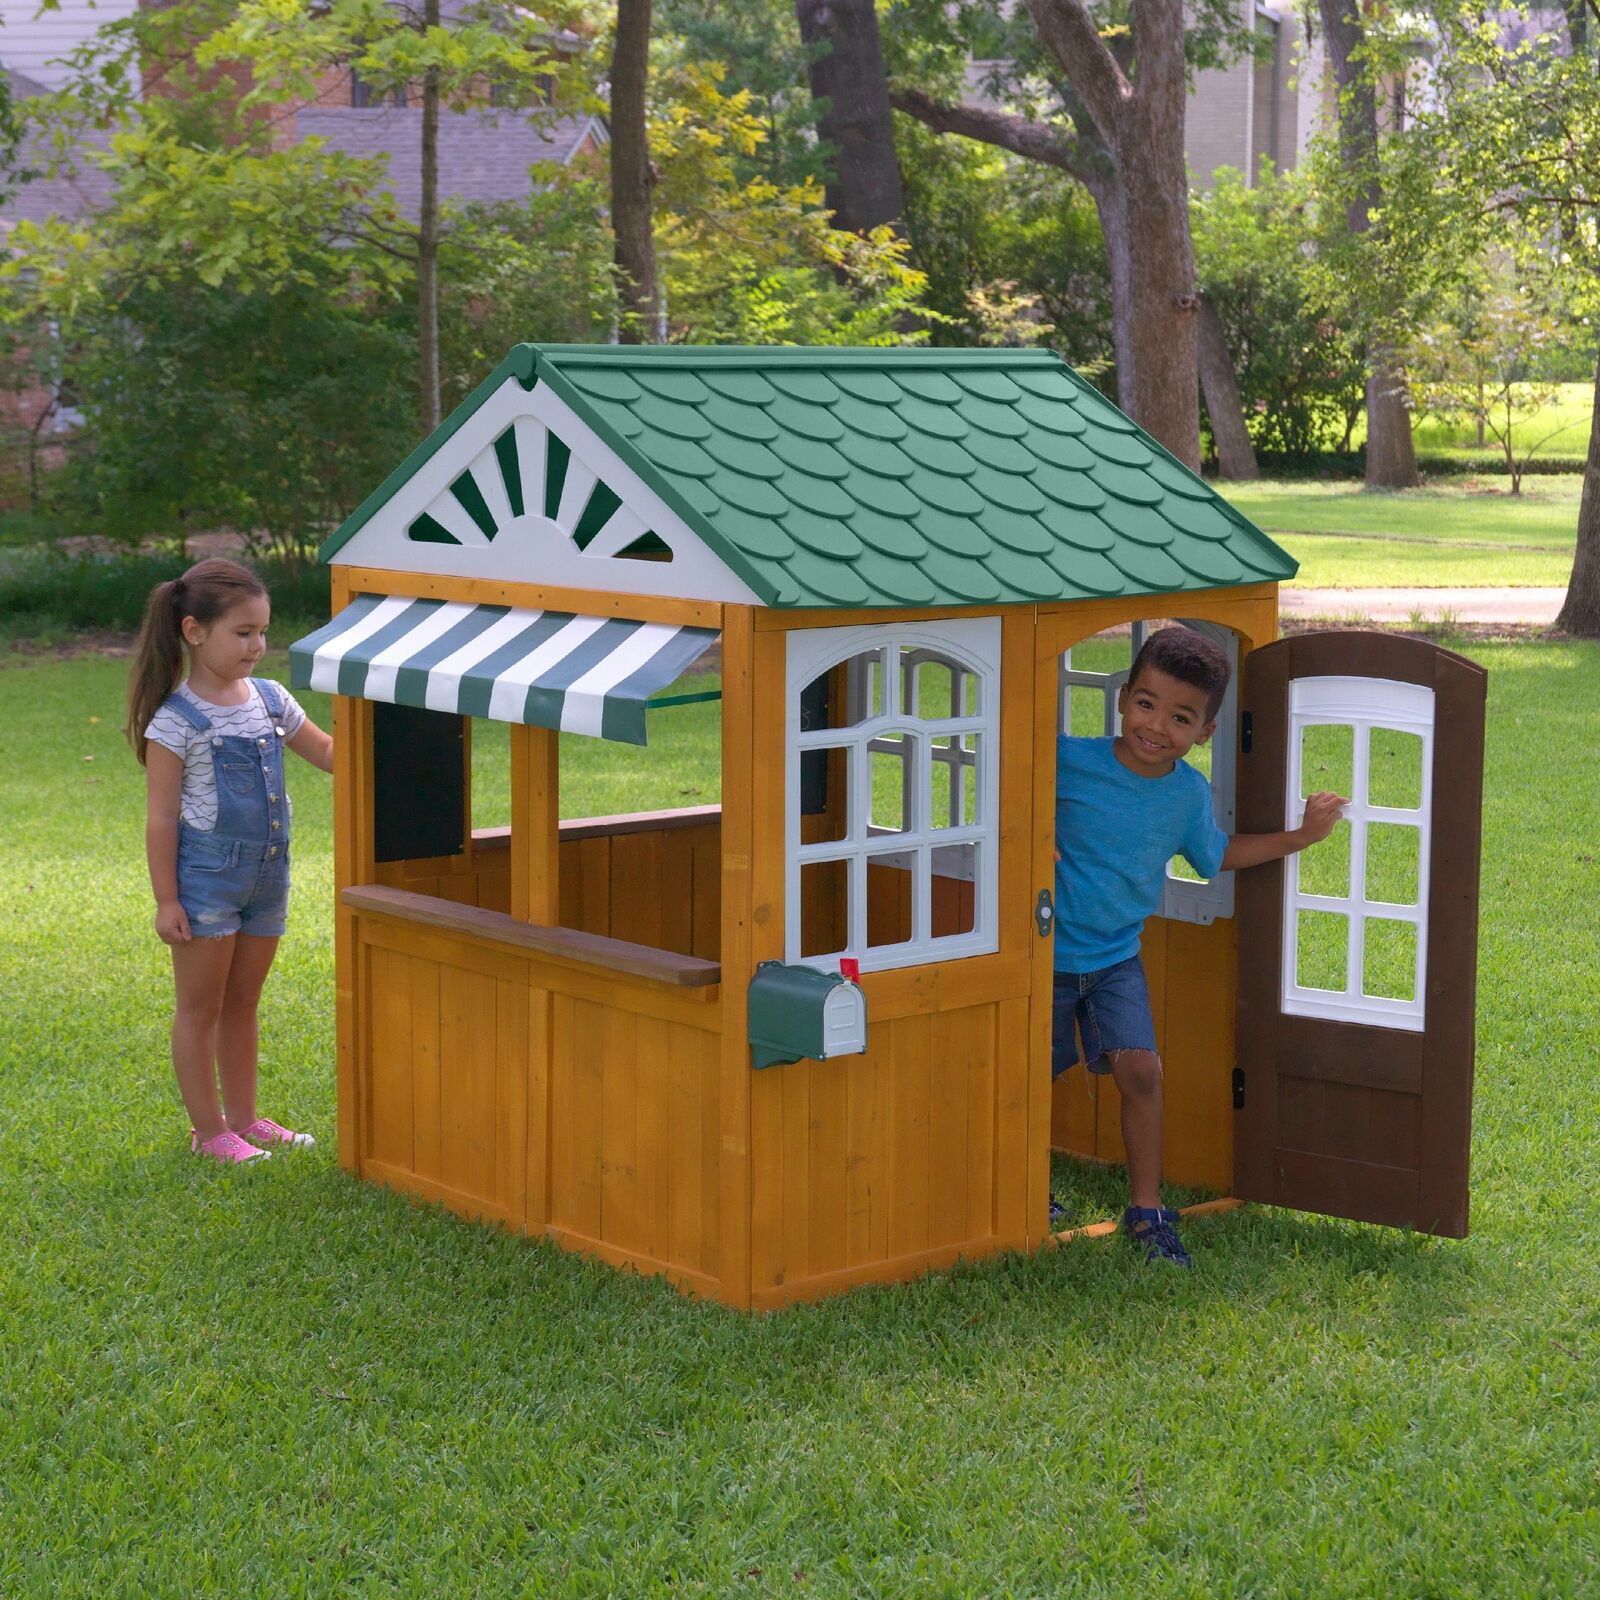 Outdoor Playhouse On Sale - Top 25